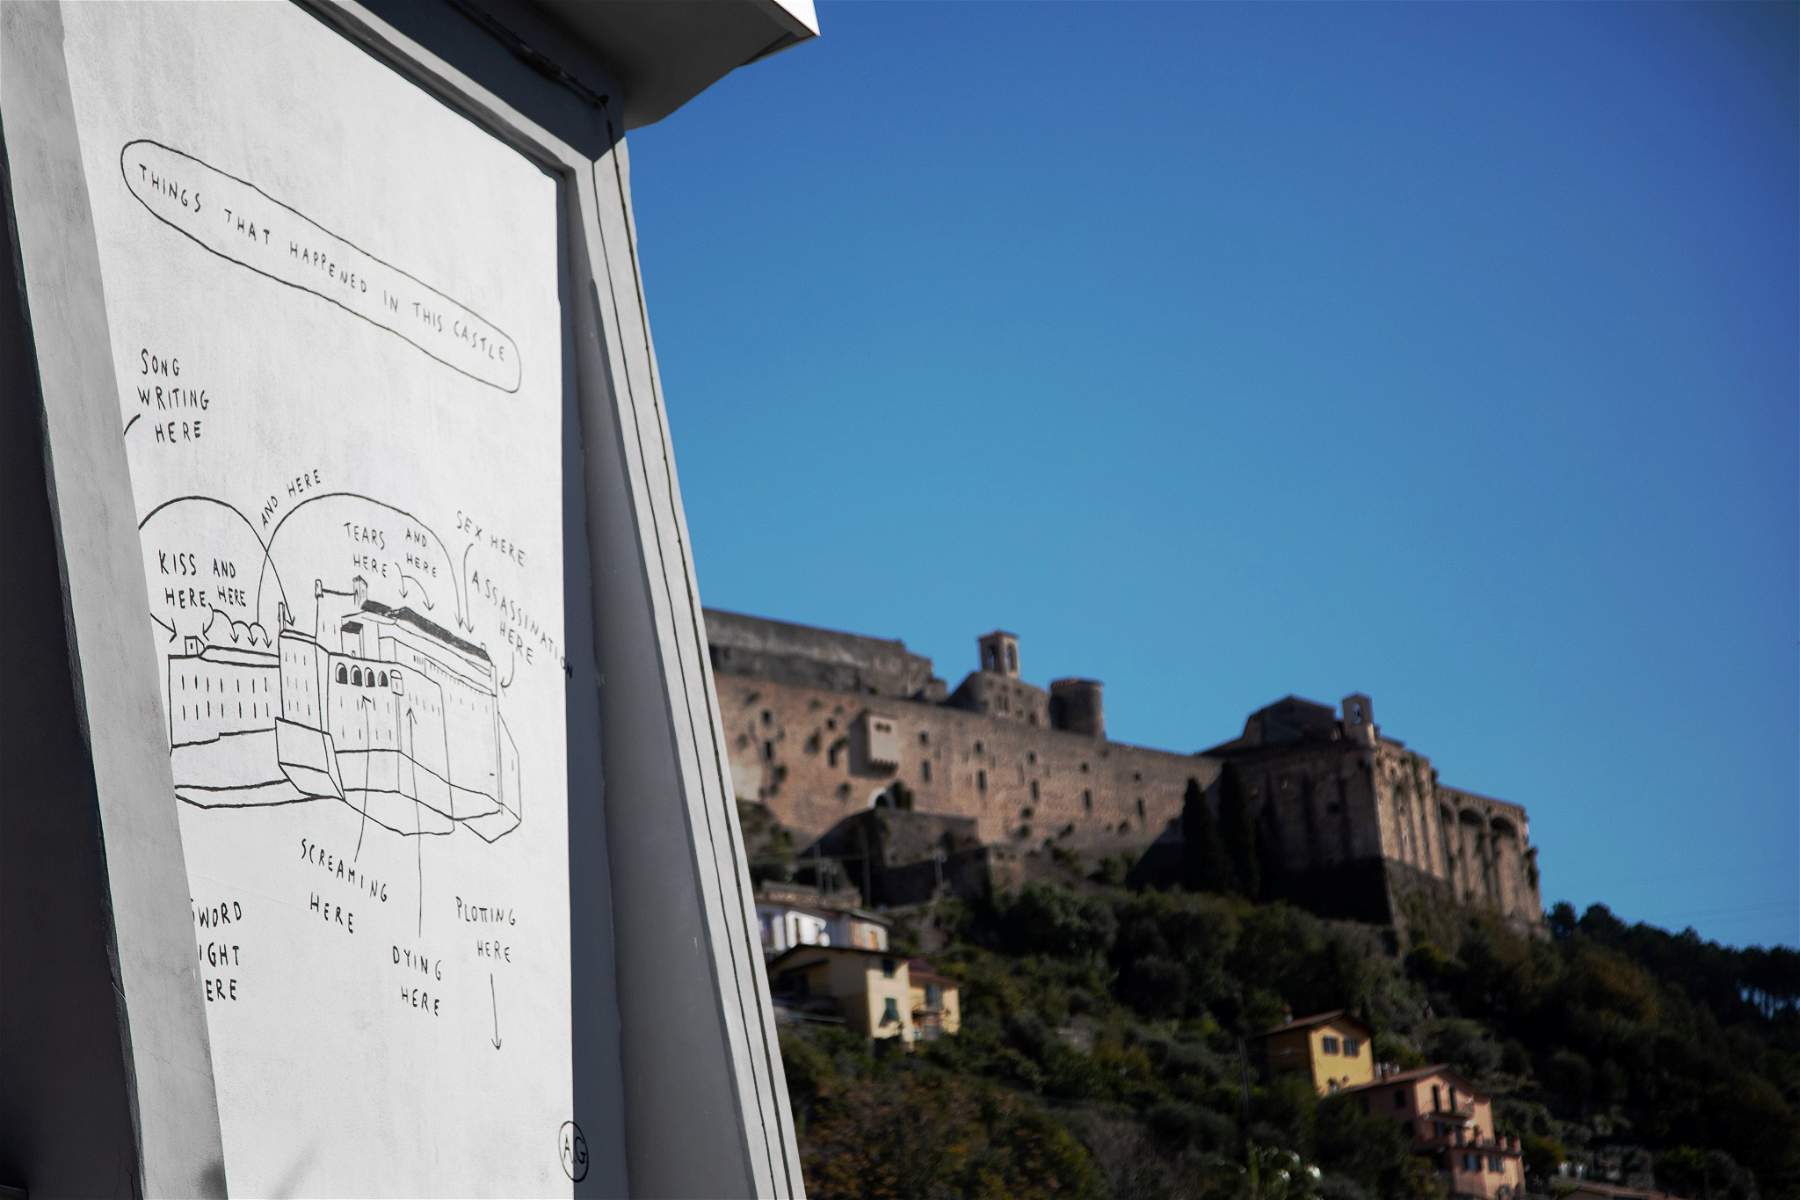 Street art that dialogues with ancient monuments. Aldo Giannotti's murals in Massa